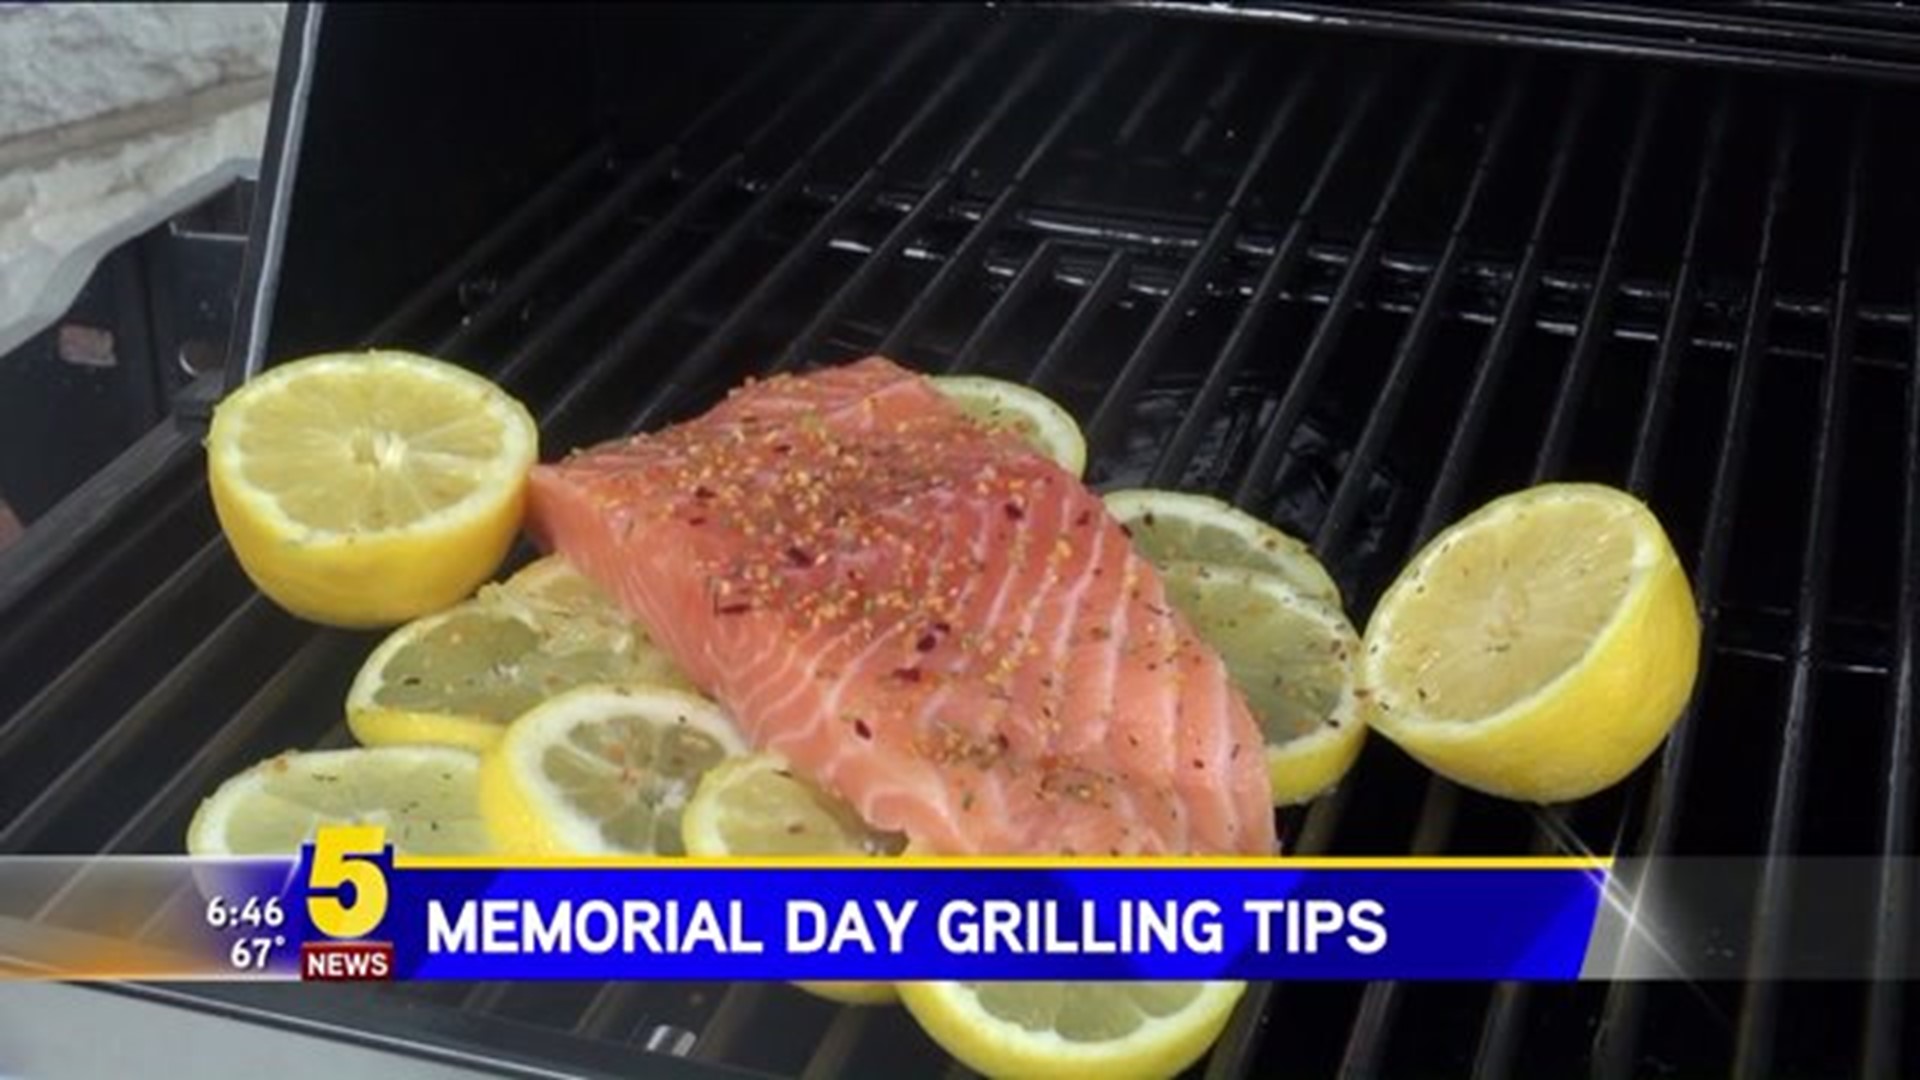 5NEWS This Morning: Memorial Day Grilling Tips